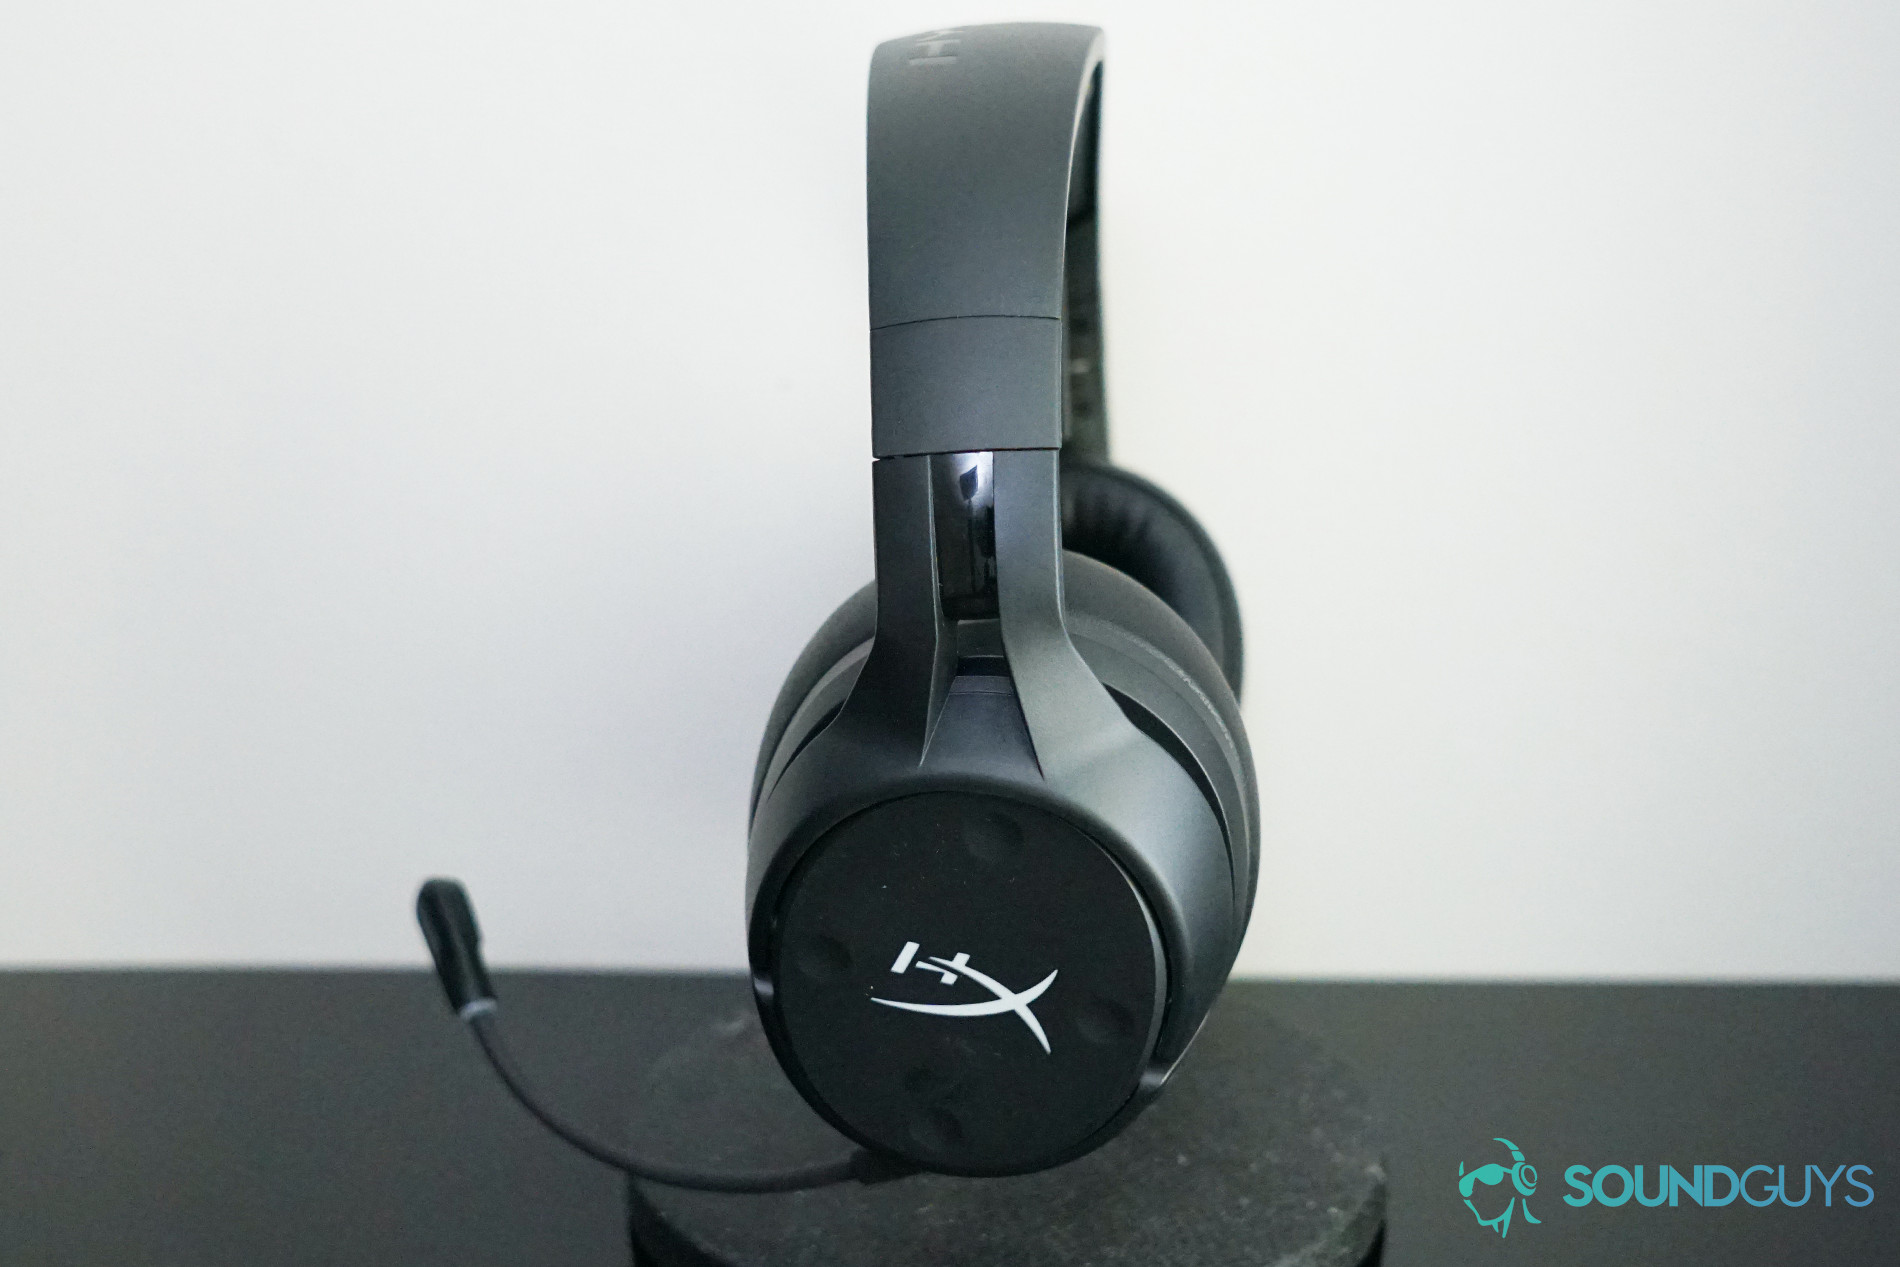 The HyperX Cloud Flight S sits on a stand on a black reflective surface,